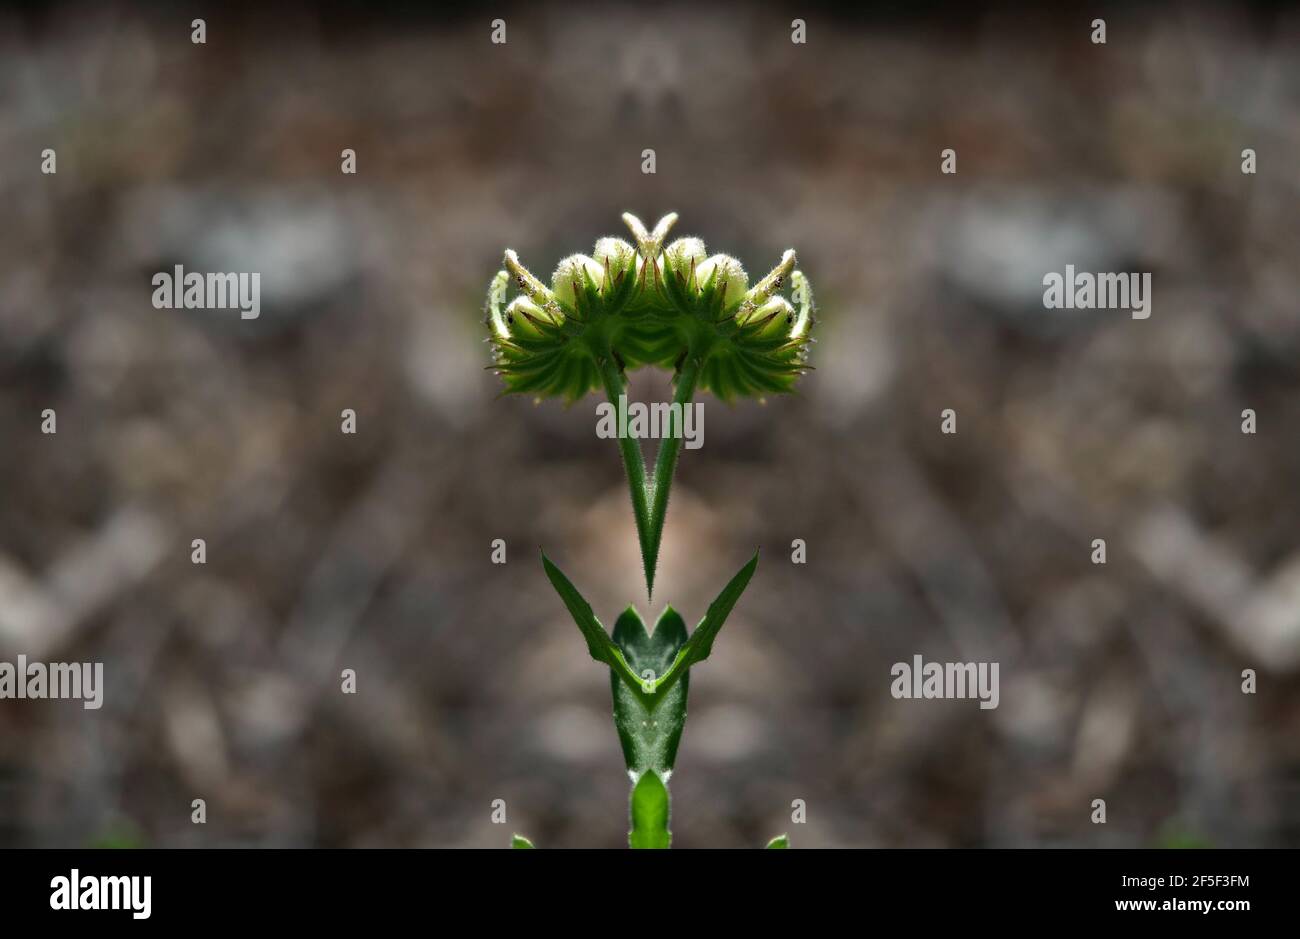 Daisy buds on a symmetrical abstract composition. Stock Photo